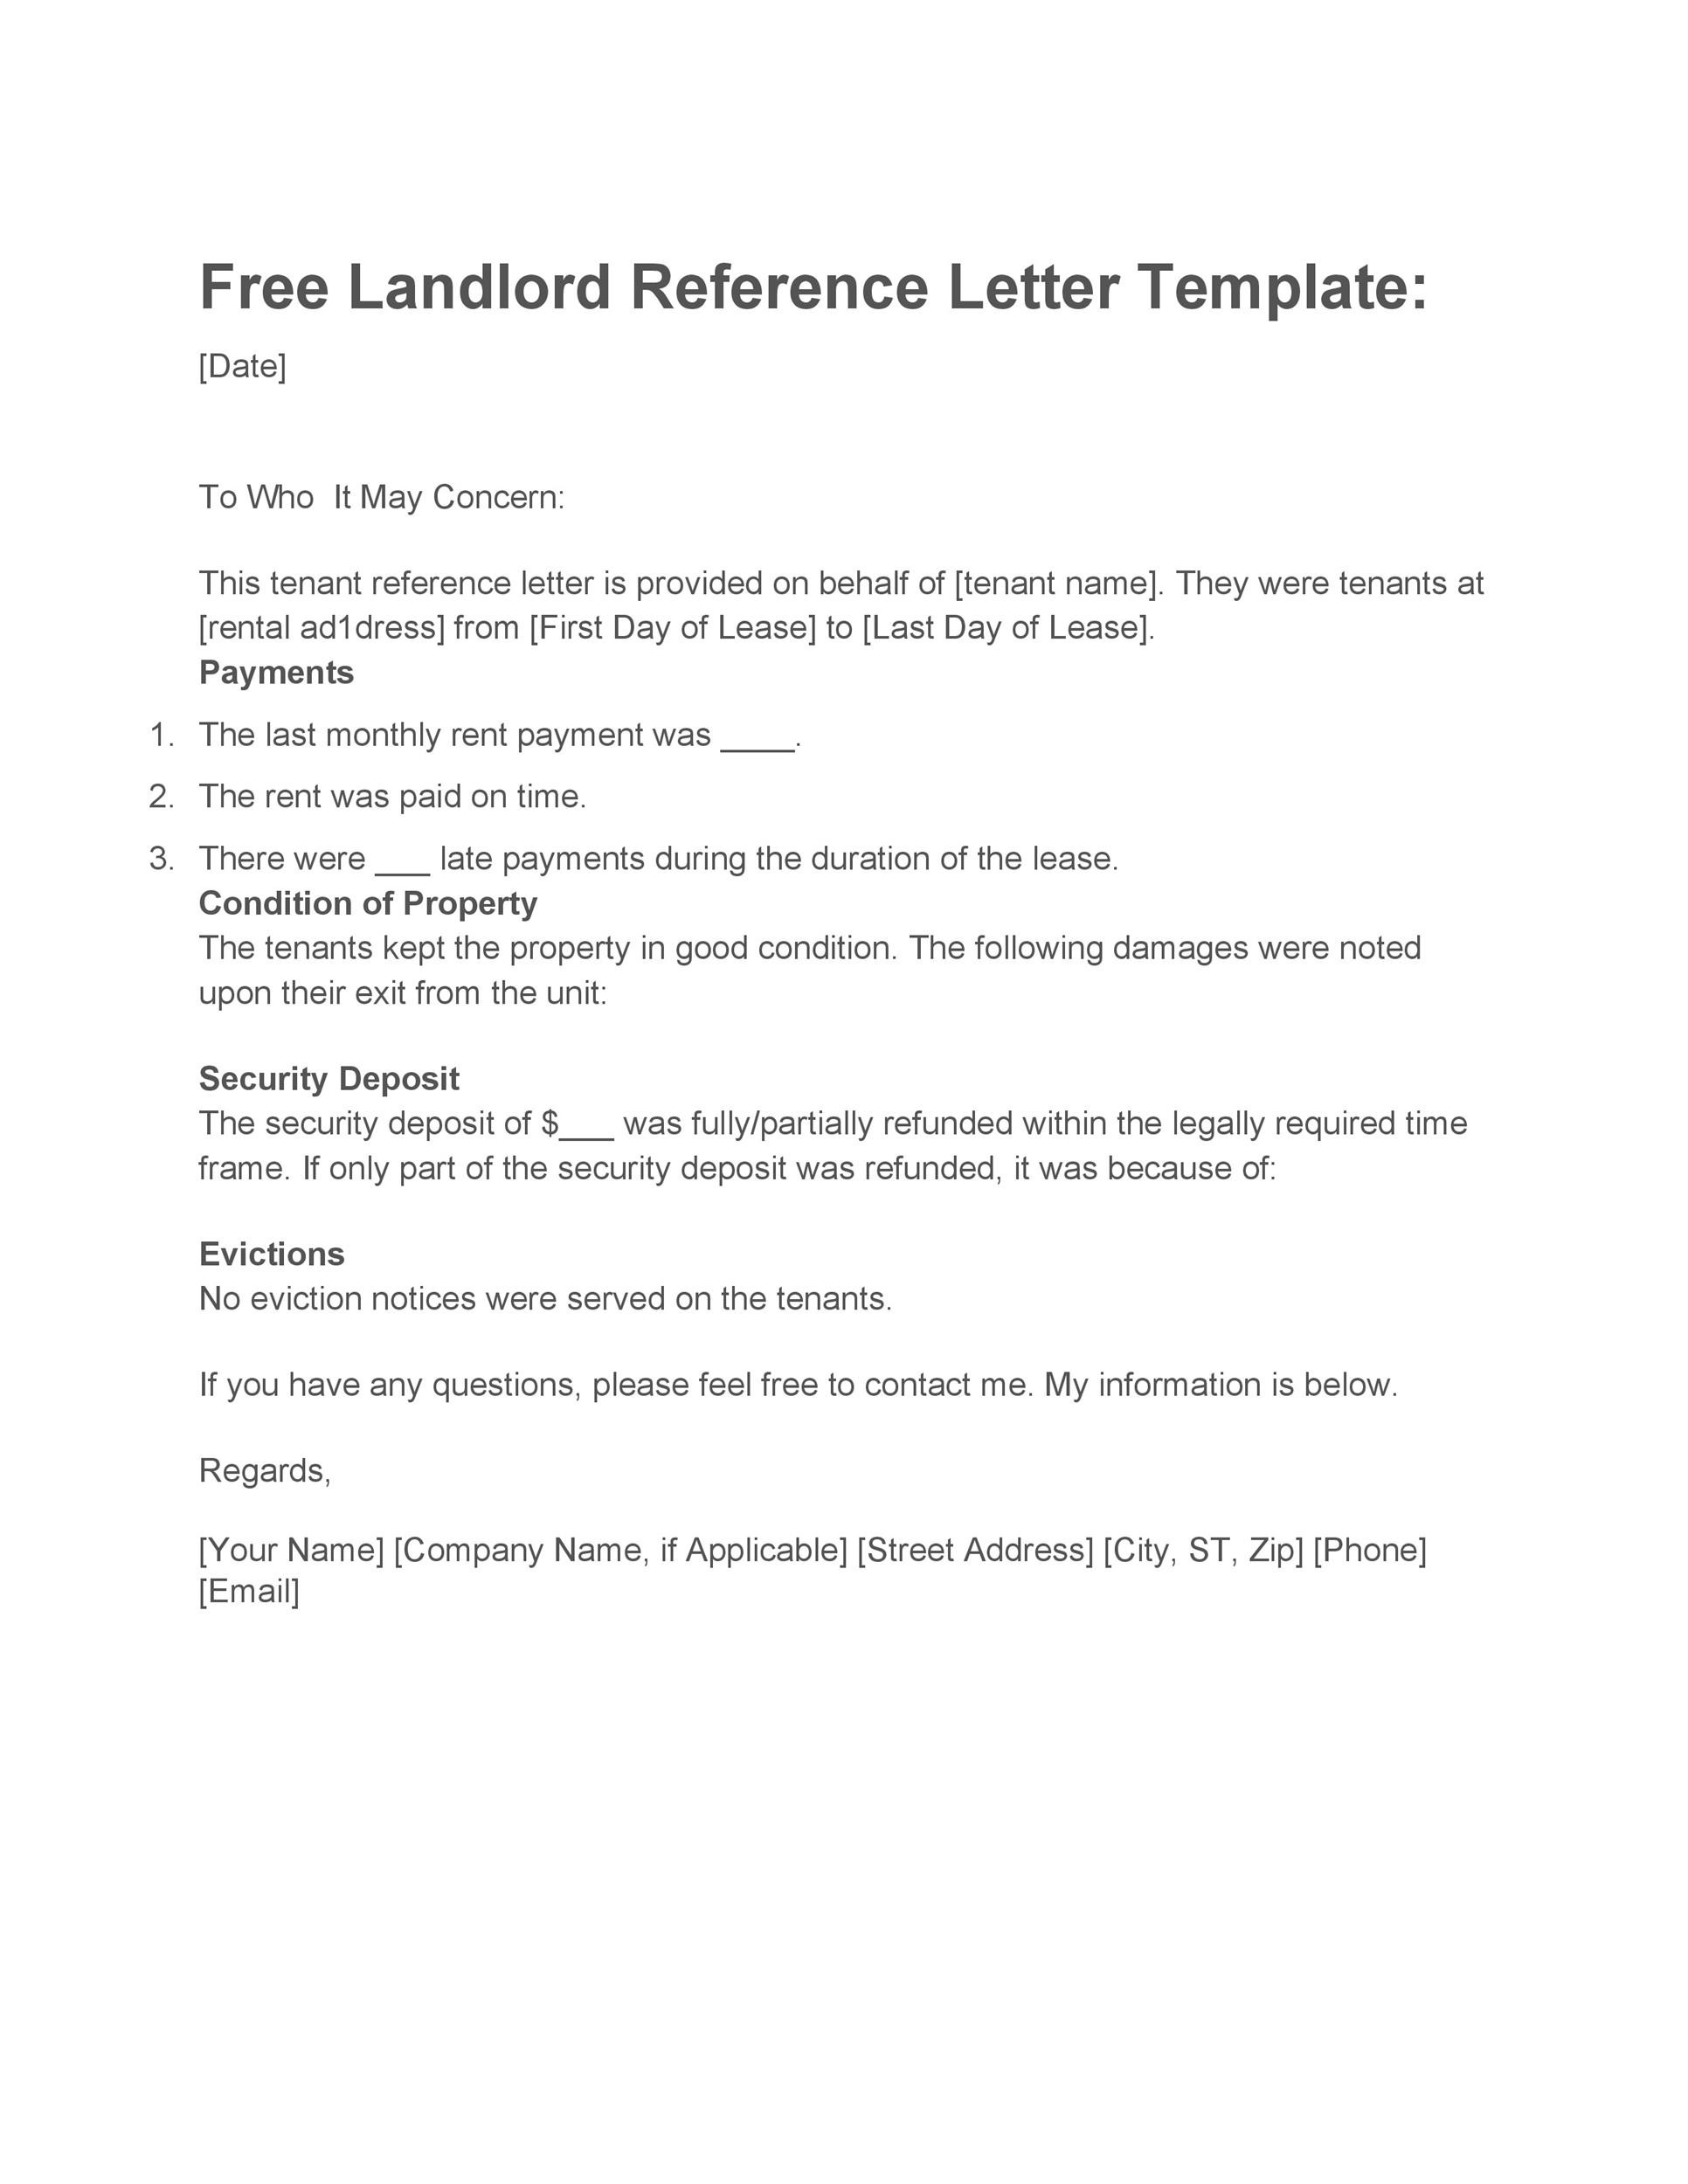 40+ Landlord Reference Letters & Form Samples ᐅ TemplateLab